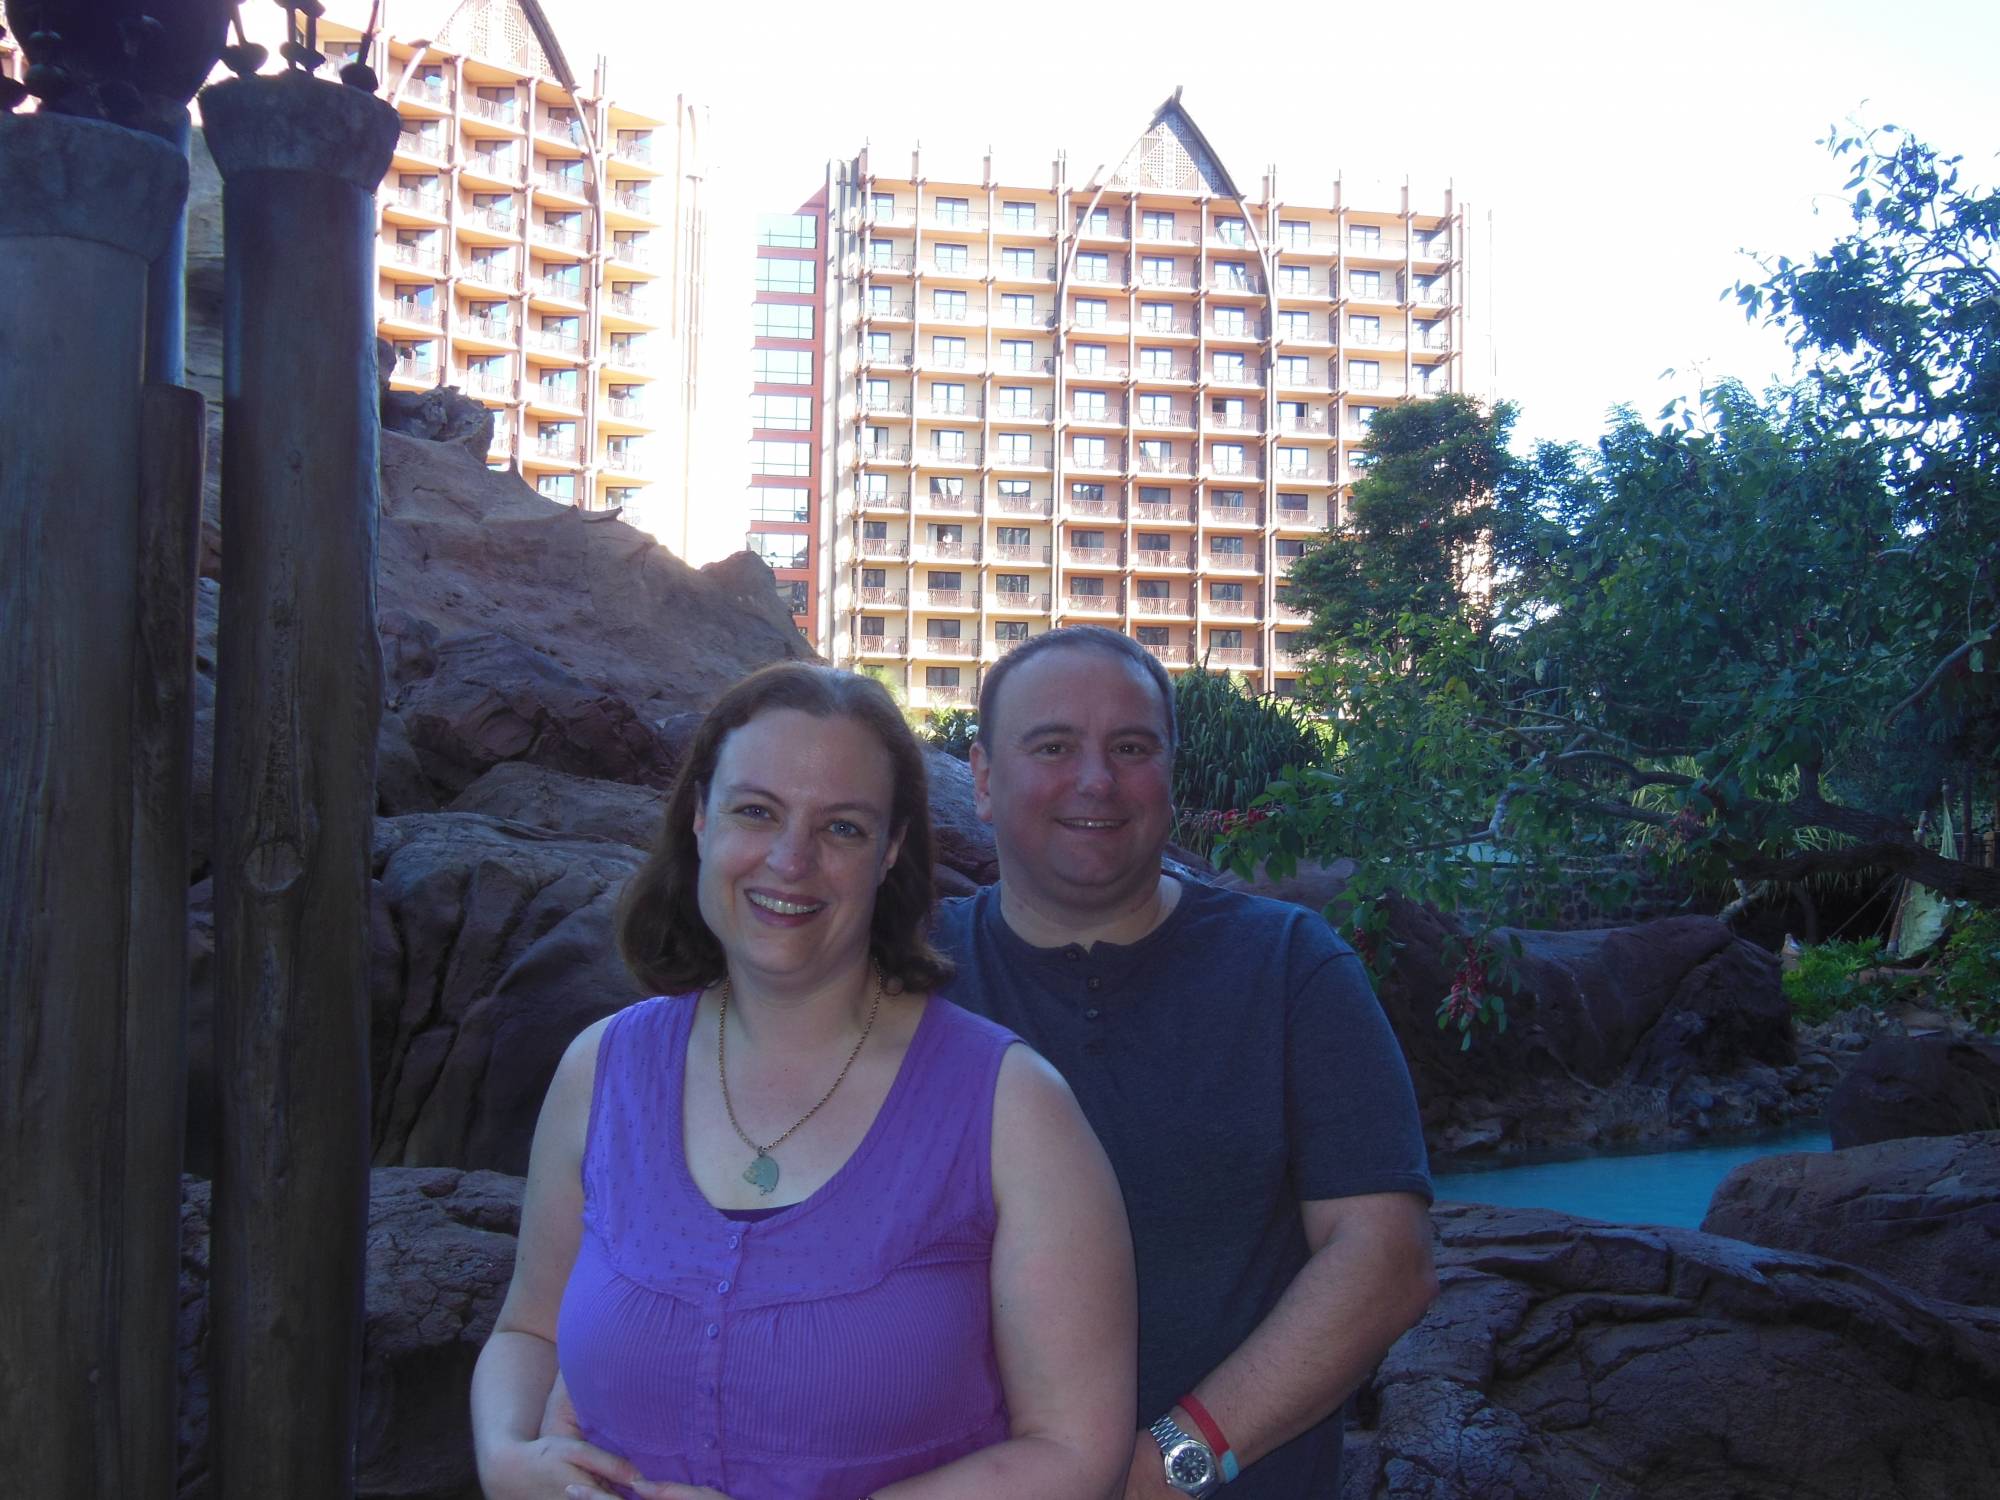 Aulani - taking time to relax